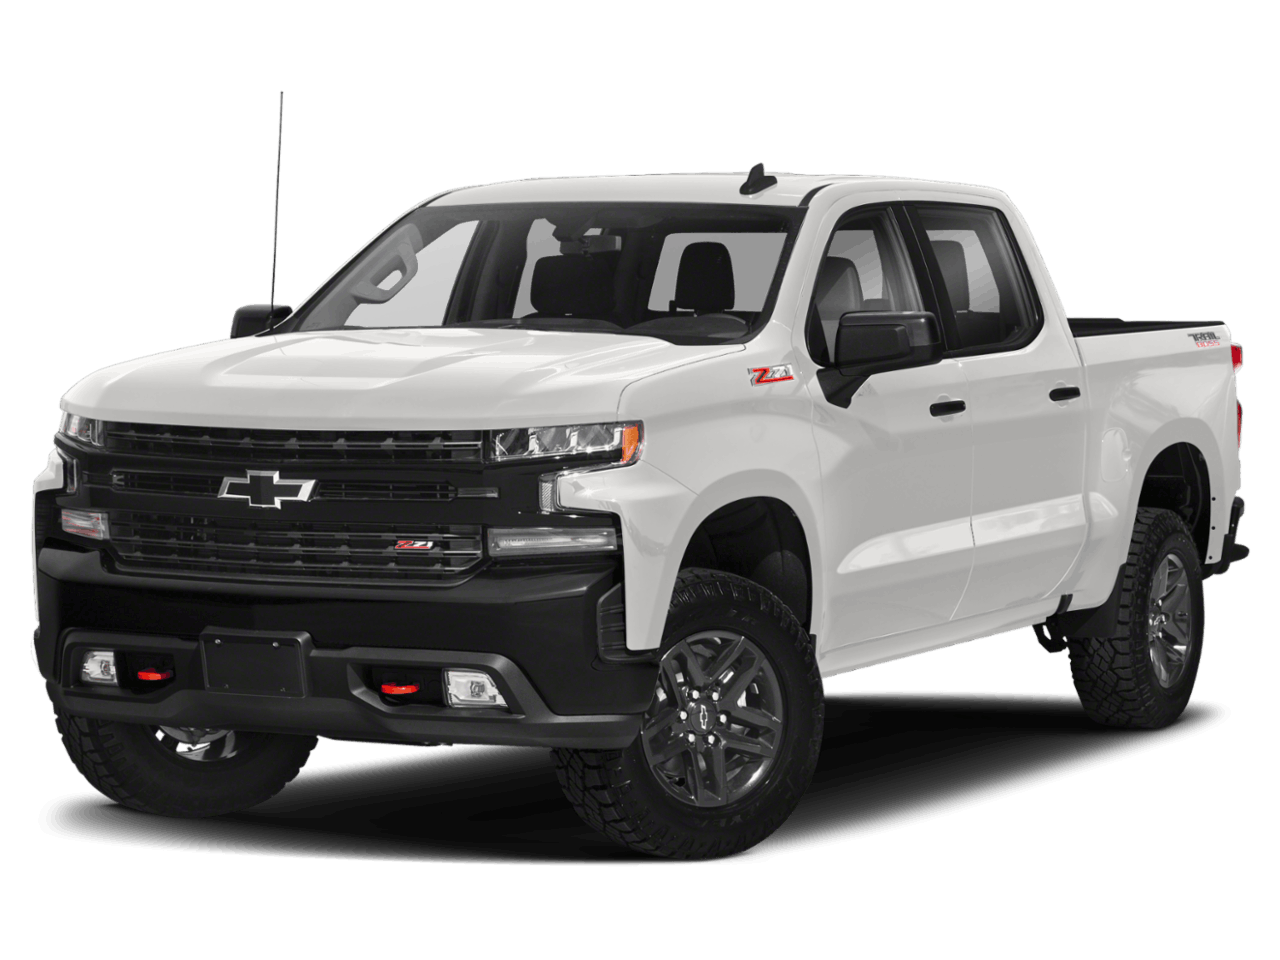 Used 2020 Chevrolet Silverado 1500 LT Trail Boss with VIN 1GCPYFED2LZ151525 for sale in Waite Park, Minnesota